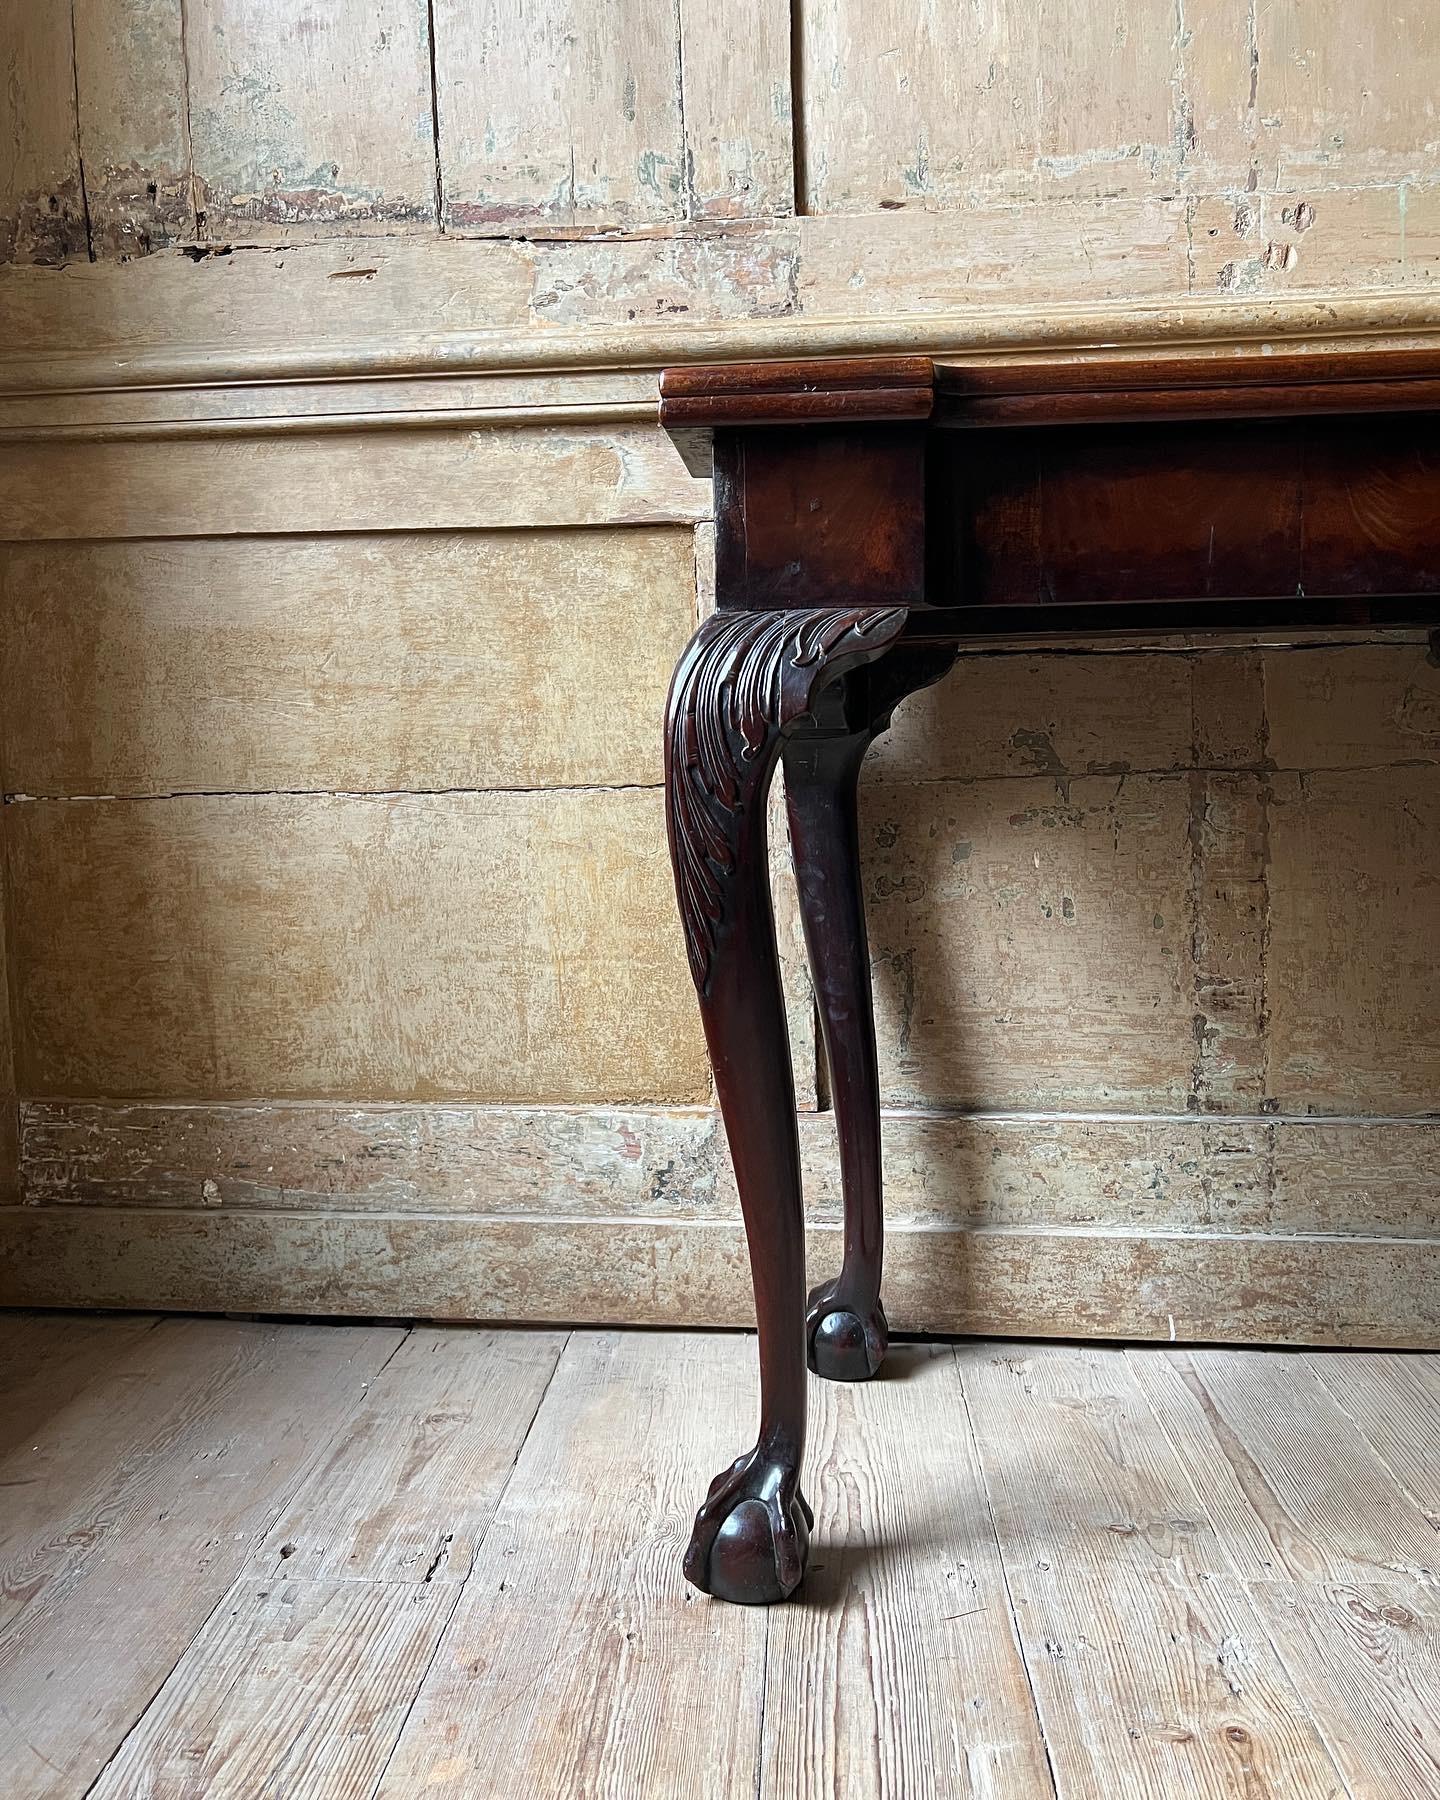 A George II mahogany tea table, England, c.1740. With carved acanthus knees and ball & claw feet to all four sides, opening with a rear gateleg action. Fantastic colour & patina to the surfaces.

Measures - 73cm H x 74 W x 42cm D.

